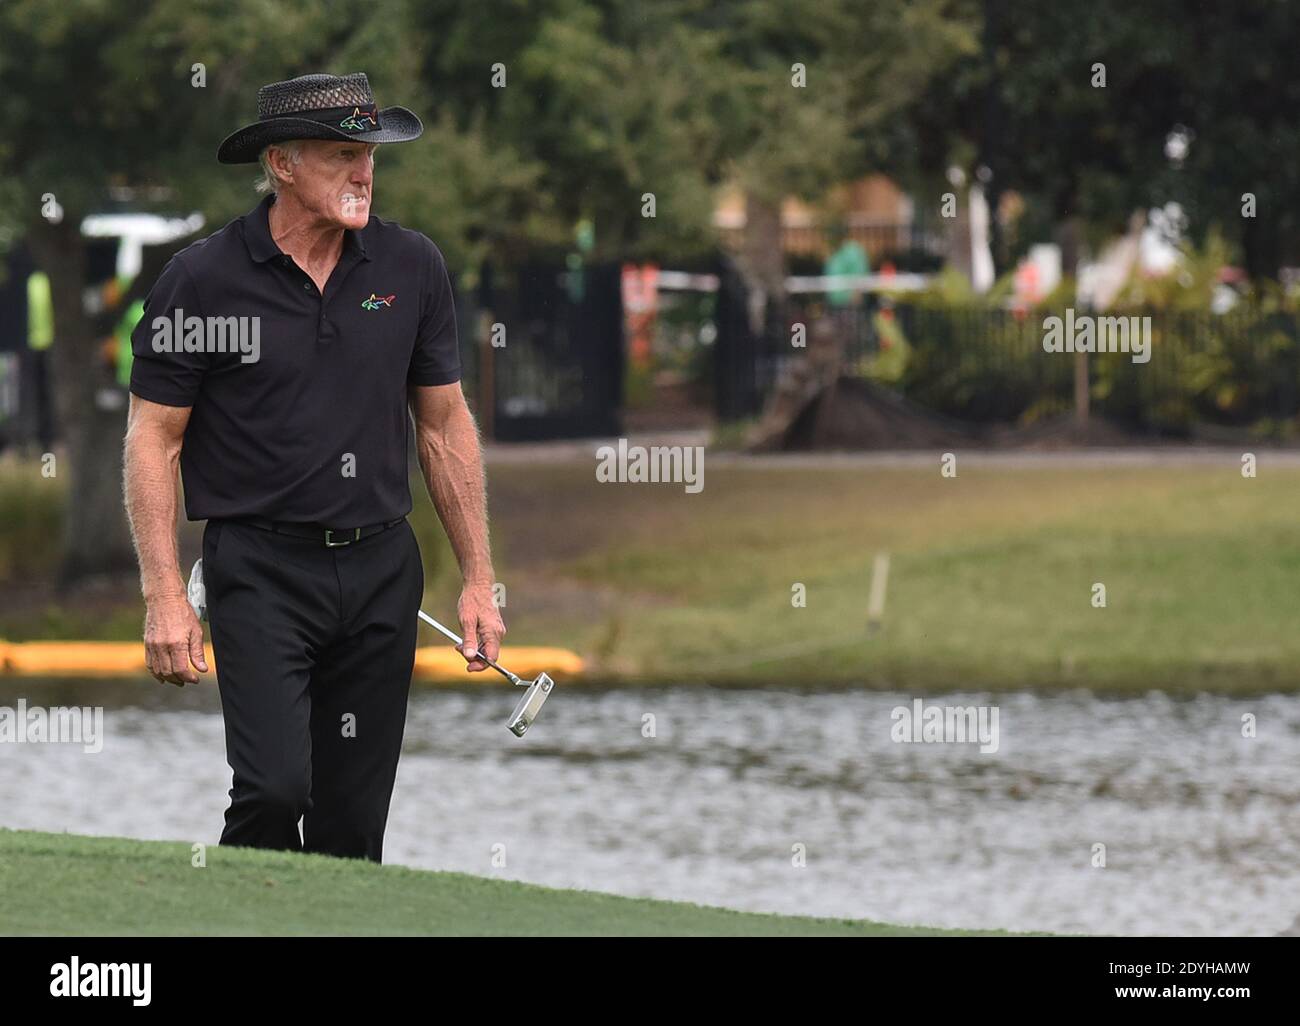 December 20, 2020 - Orlando, Florida, United States - Australian Greg Norman approaches the 18th green during the final round at the PNC Championship golf tournament at the Ritz-Carlton Golf Club on December 20, 2020 in Orlando, Florida. On Christmas Day, Norman posted a photo to Instagram from a hospital bed where he was being treated for COVID-19 symptoms. NormanÕs son, Greg Norman Jr., who played with his father at the tournament, also posted a photo to Instagram, stating that he and his fiancee have tested positive for the COVID-19 virus. (Paul Hennessy/Alamy) Stock Photo